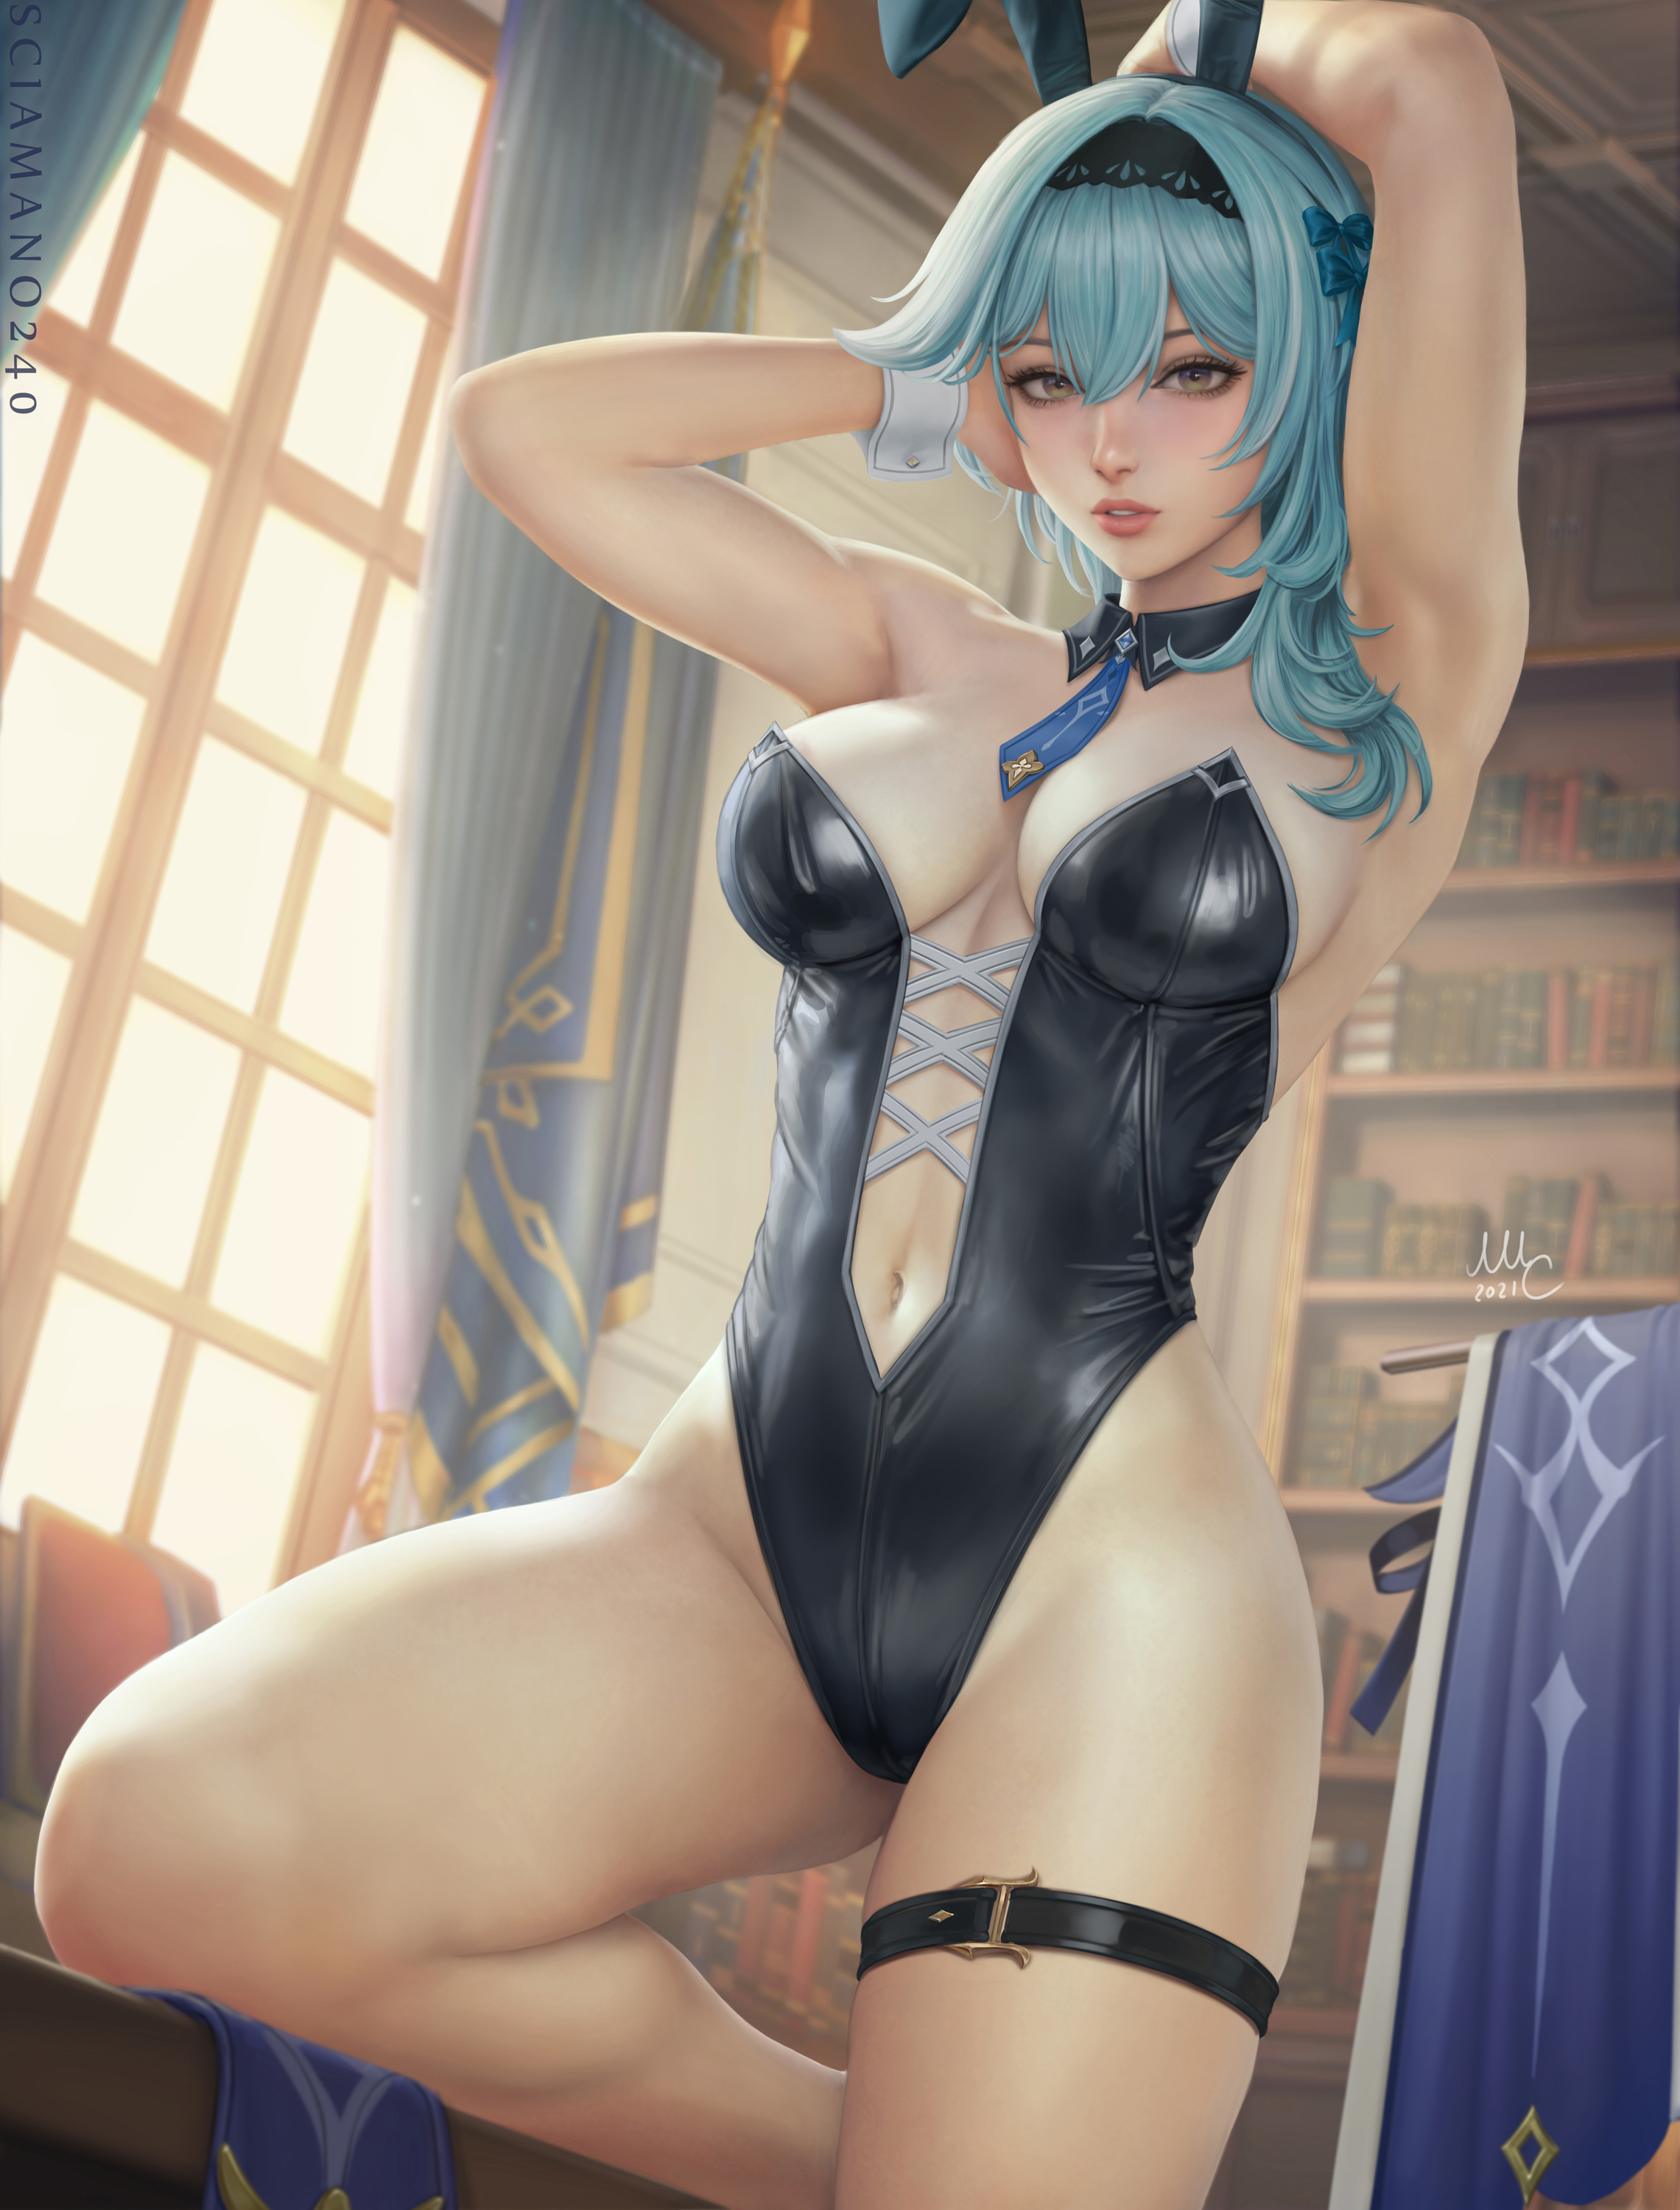 Anime 2281x3000 illustration artwork digital art fan art drawing fantasy art fantasy girl women Mirco Cabbia cleavage anime anime girls video games video game girls video game art video game characters Genshin Impact Eula (Genshin Impact) long hair blue hair looking at viewer belly belly button bare shoulders bunny ears tie arms up armpits thighs bunny suit